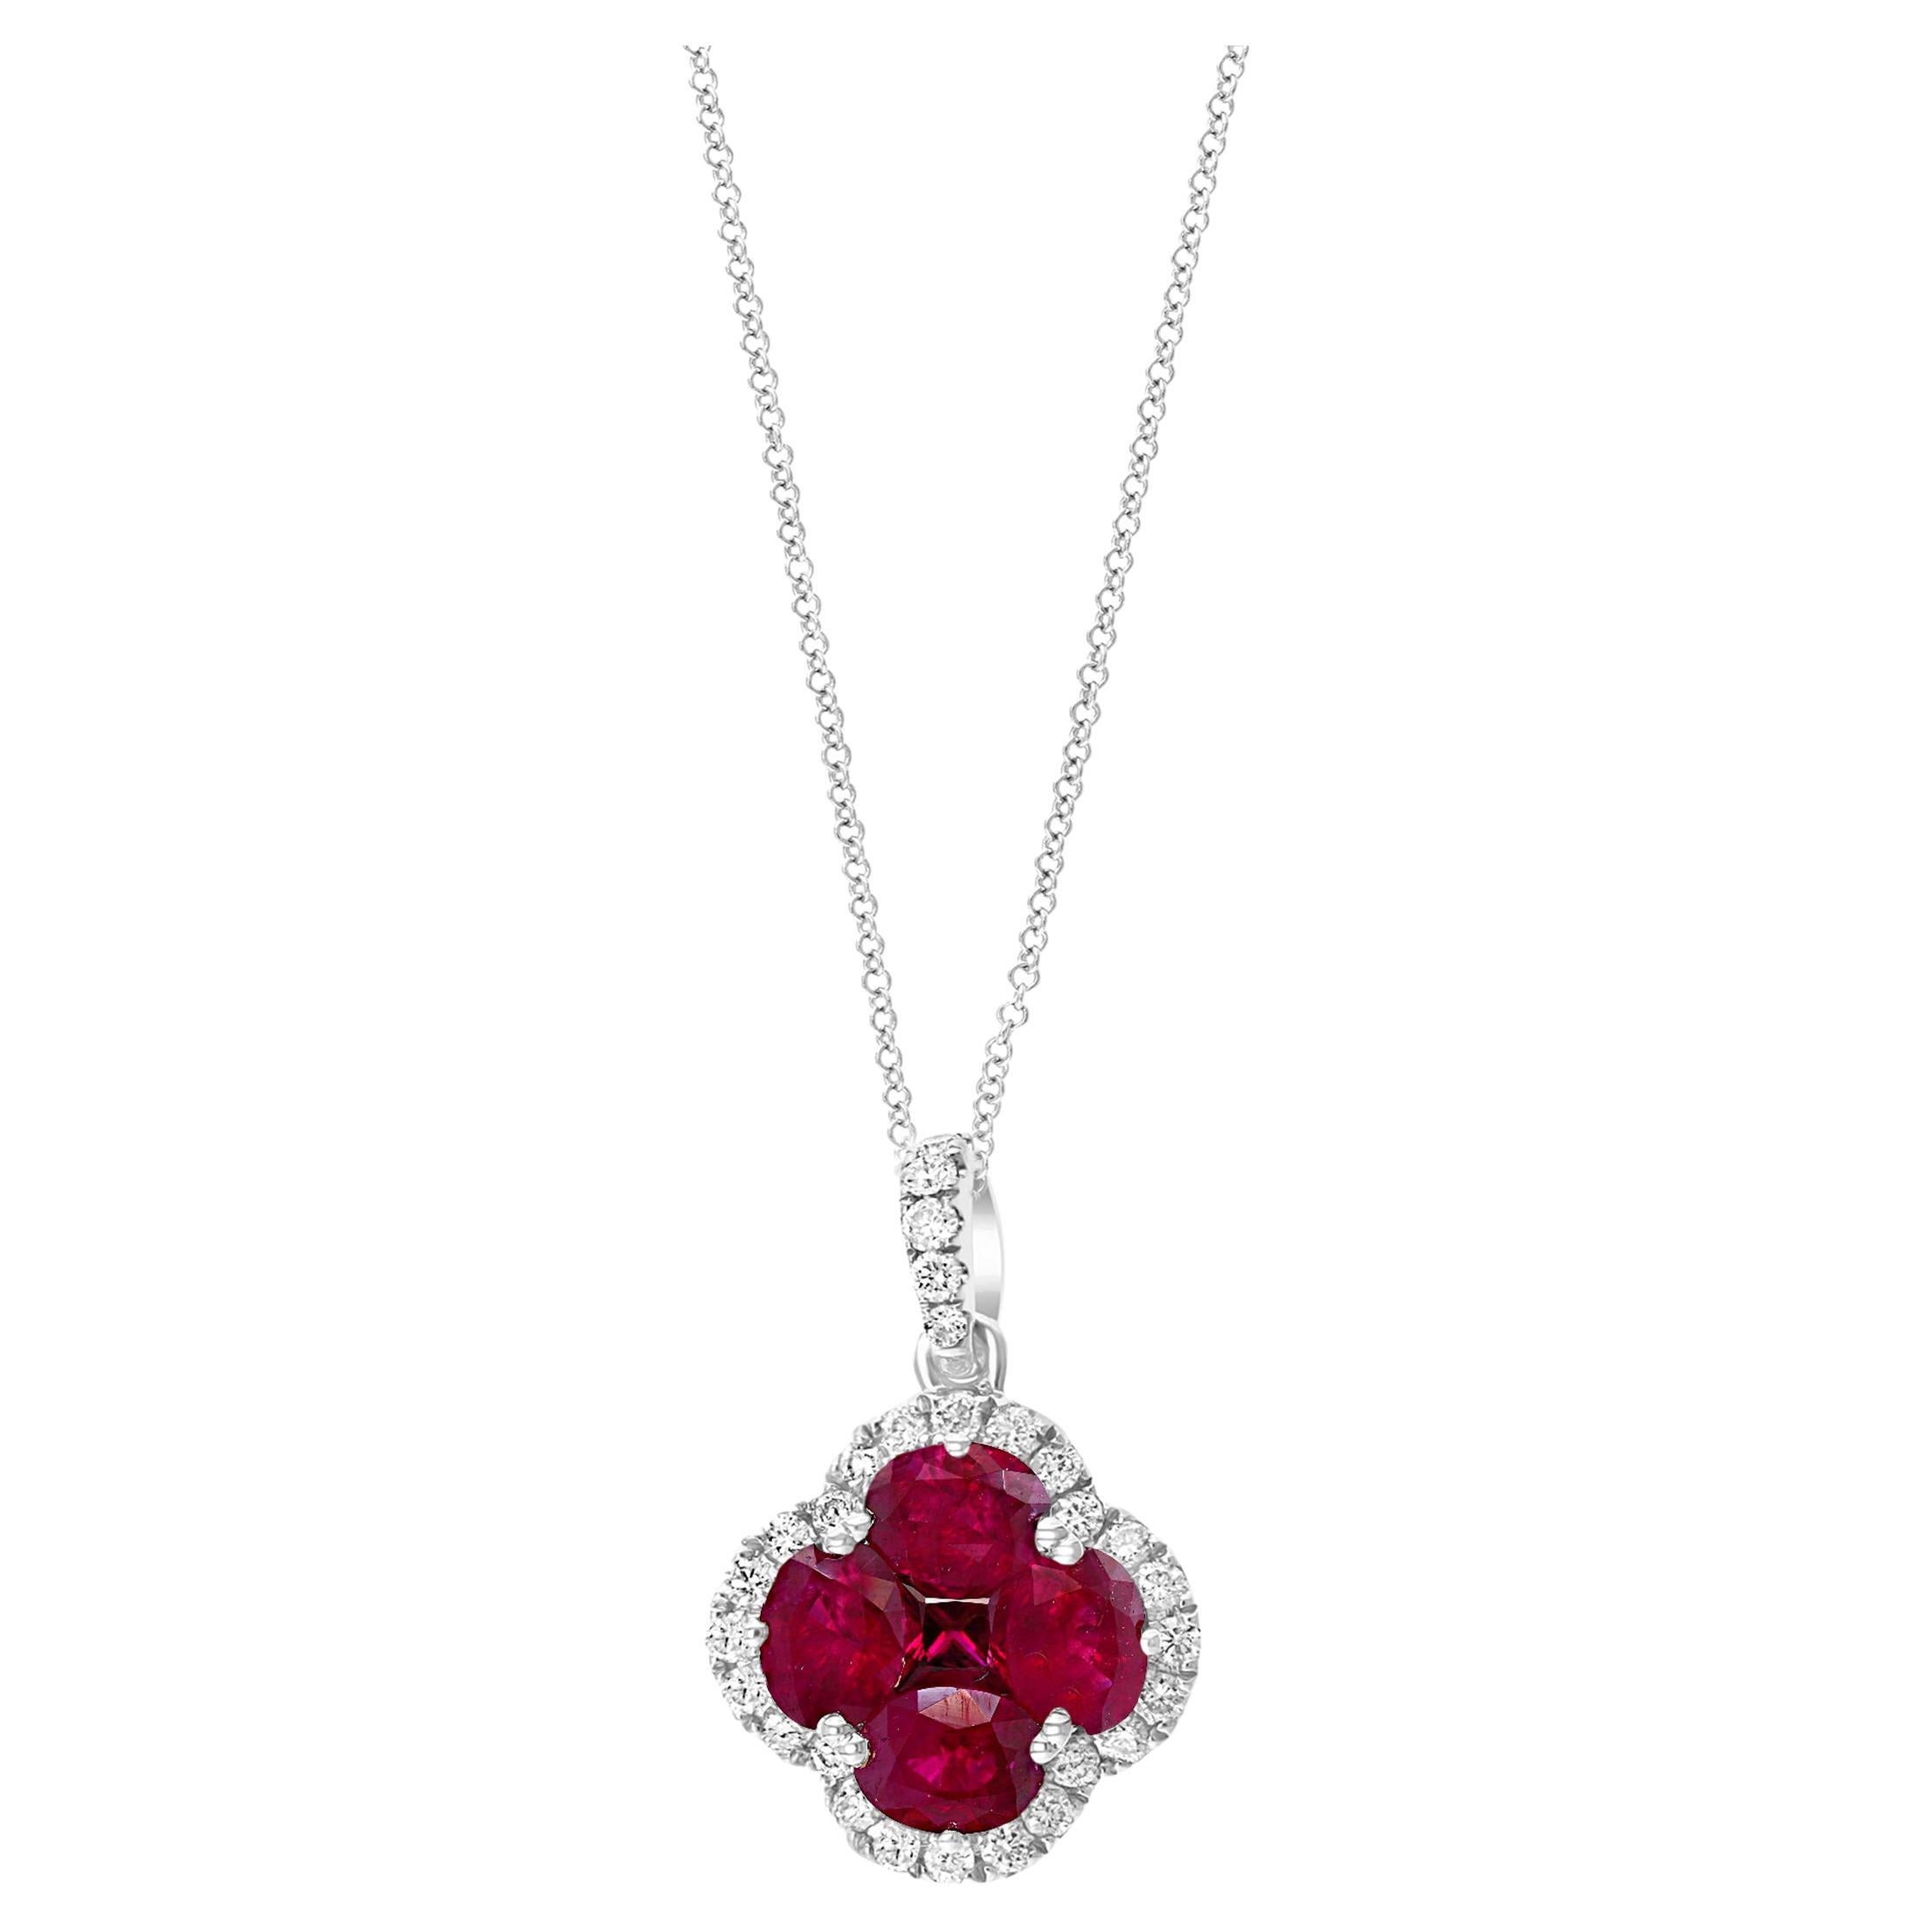 1.22 Carat Oval Cut Ruby and Diamond Pendant Necklace in 18K White Gold For Sale